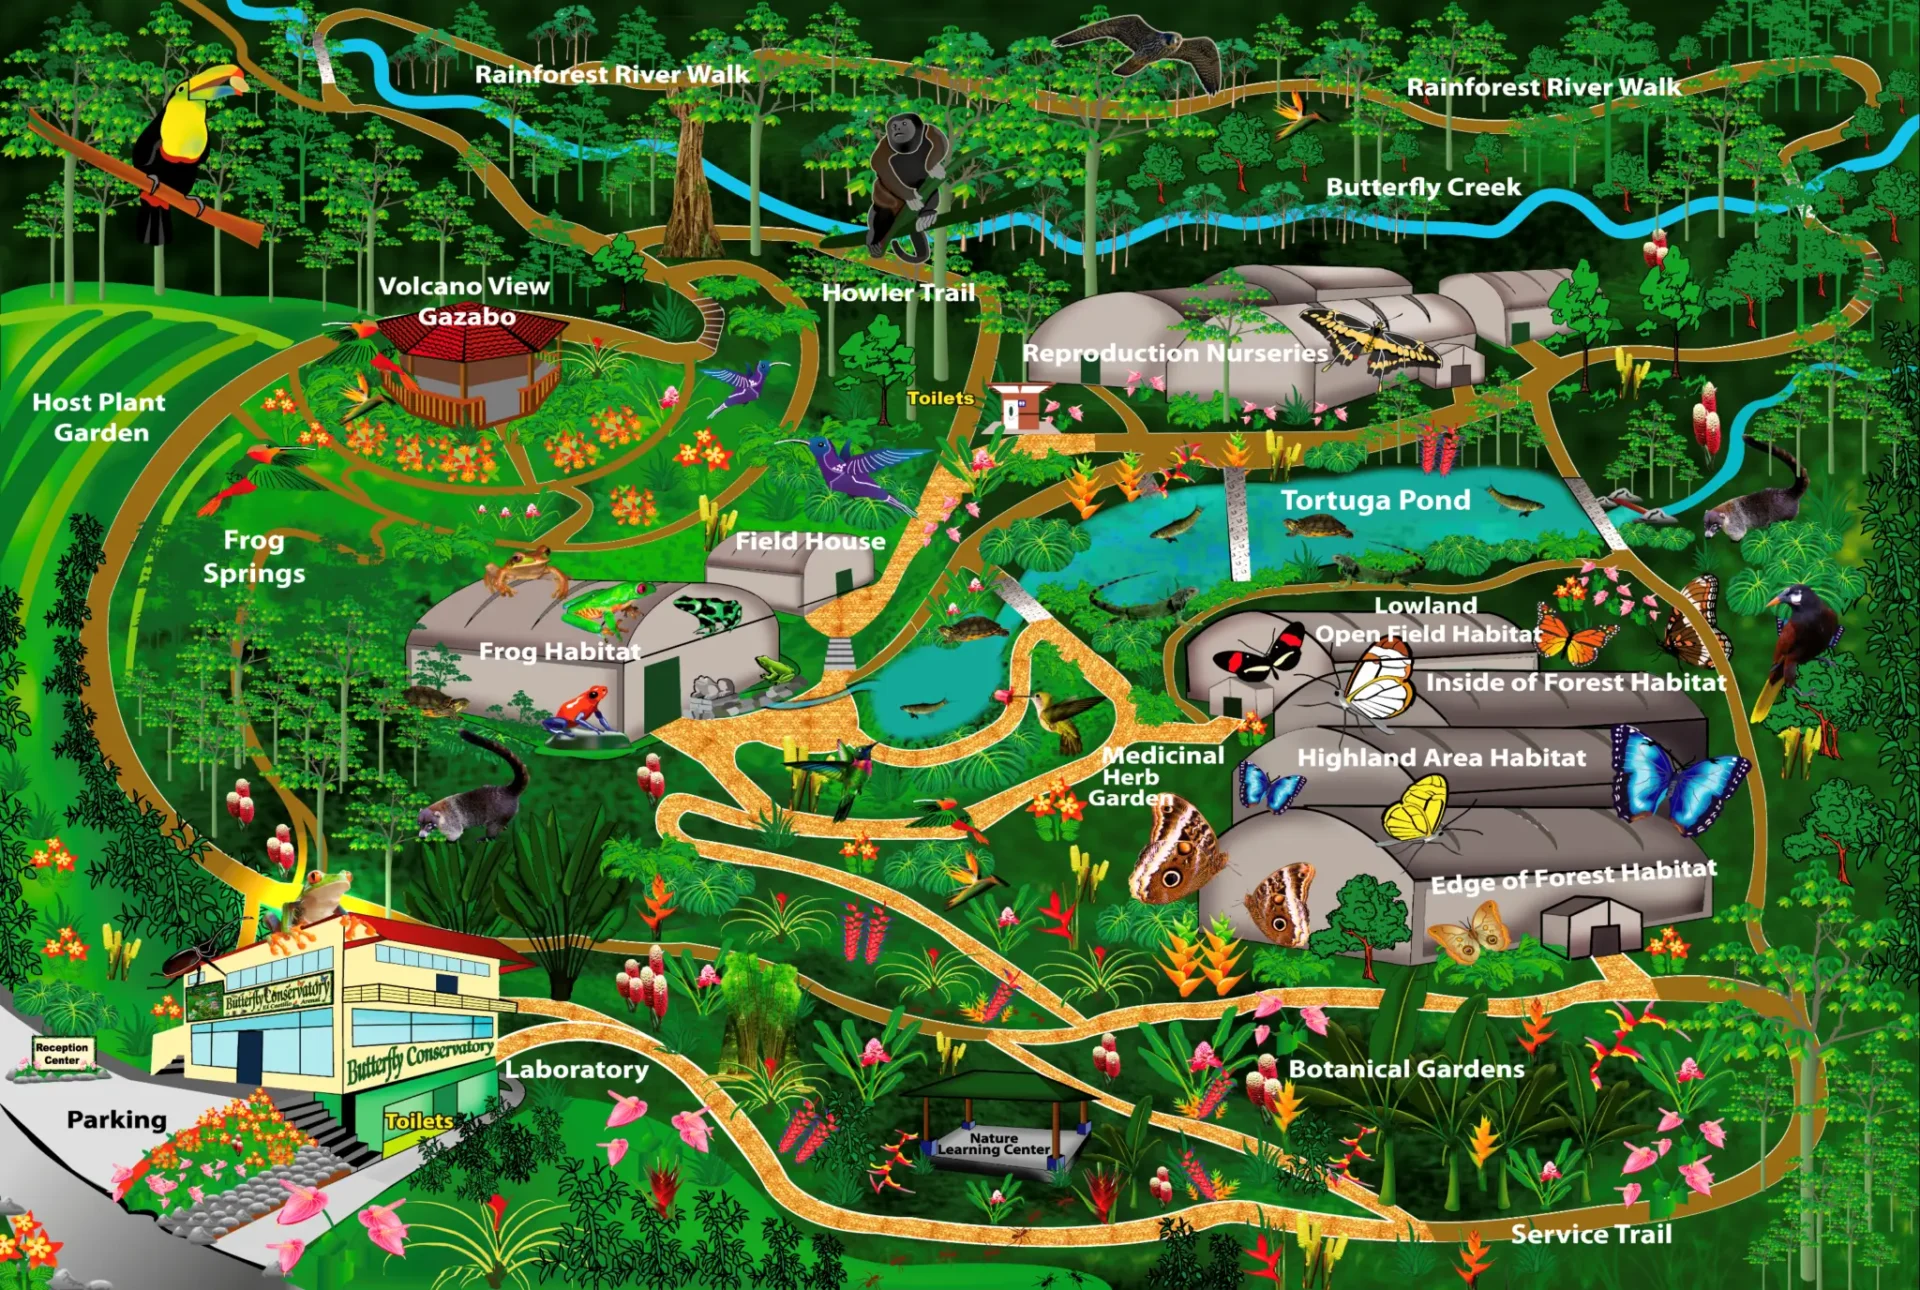 Map of the Butterfly Conservatory and Gardens